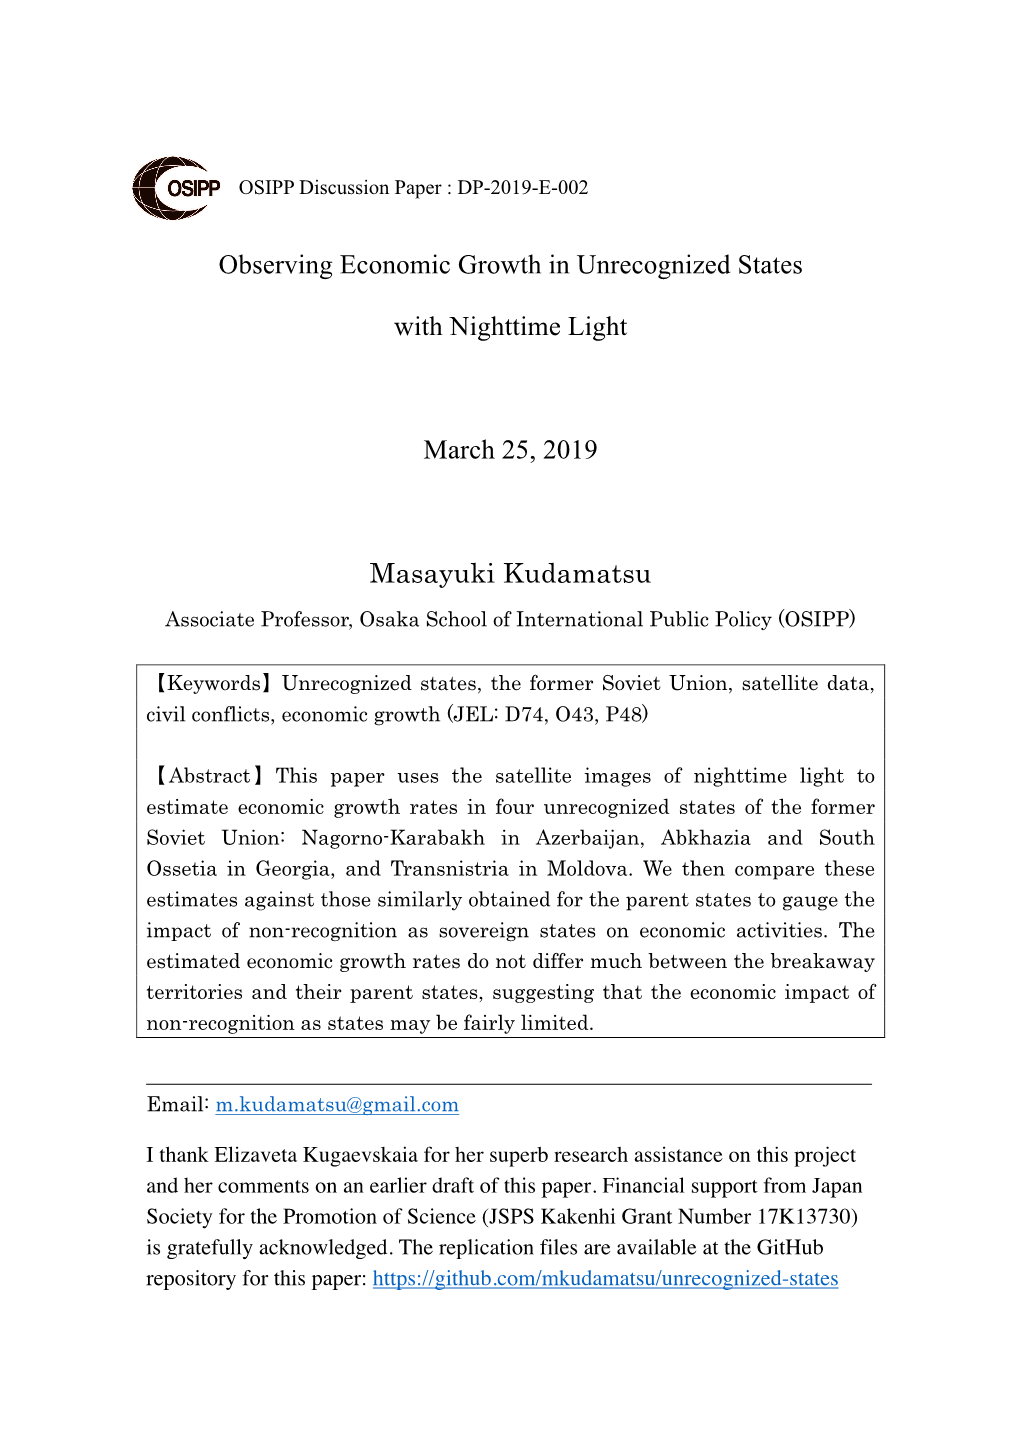 Observing Economic Growth in Unrecognized States with Nighttime